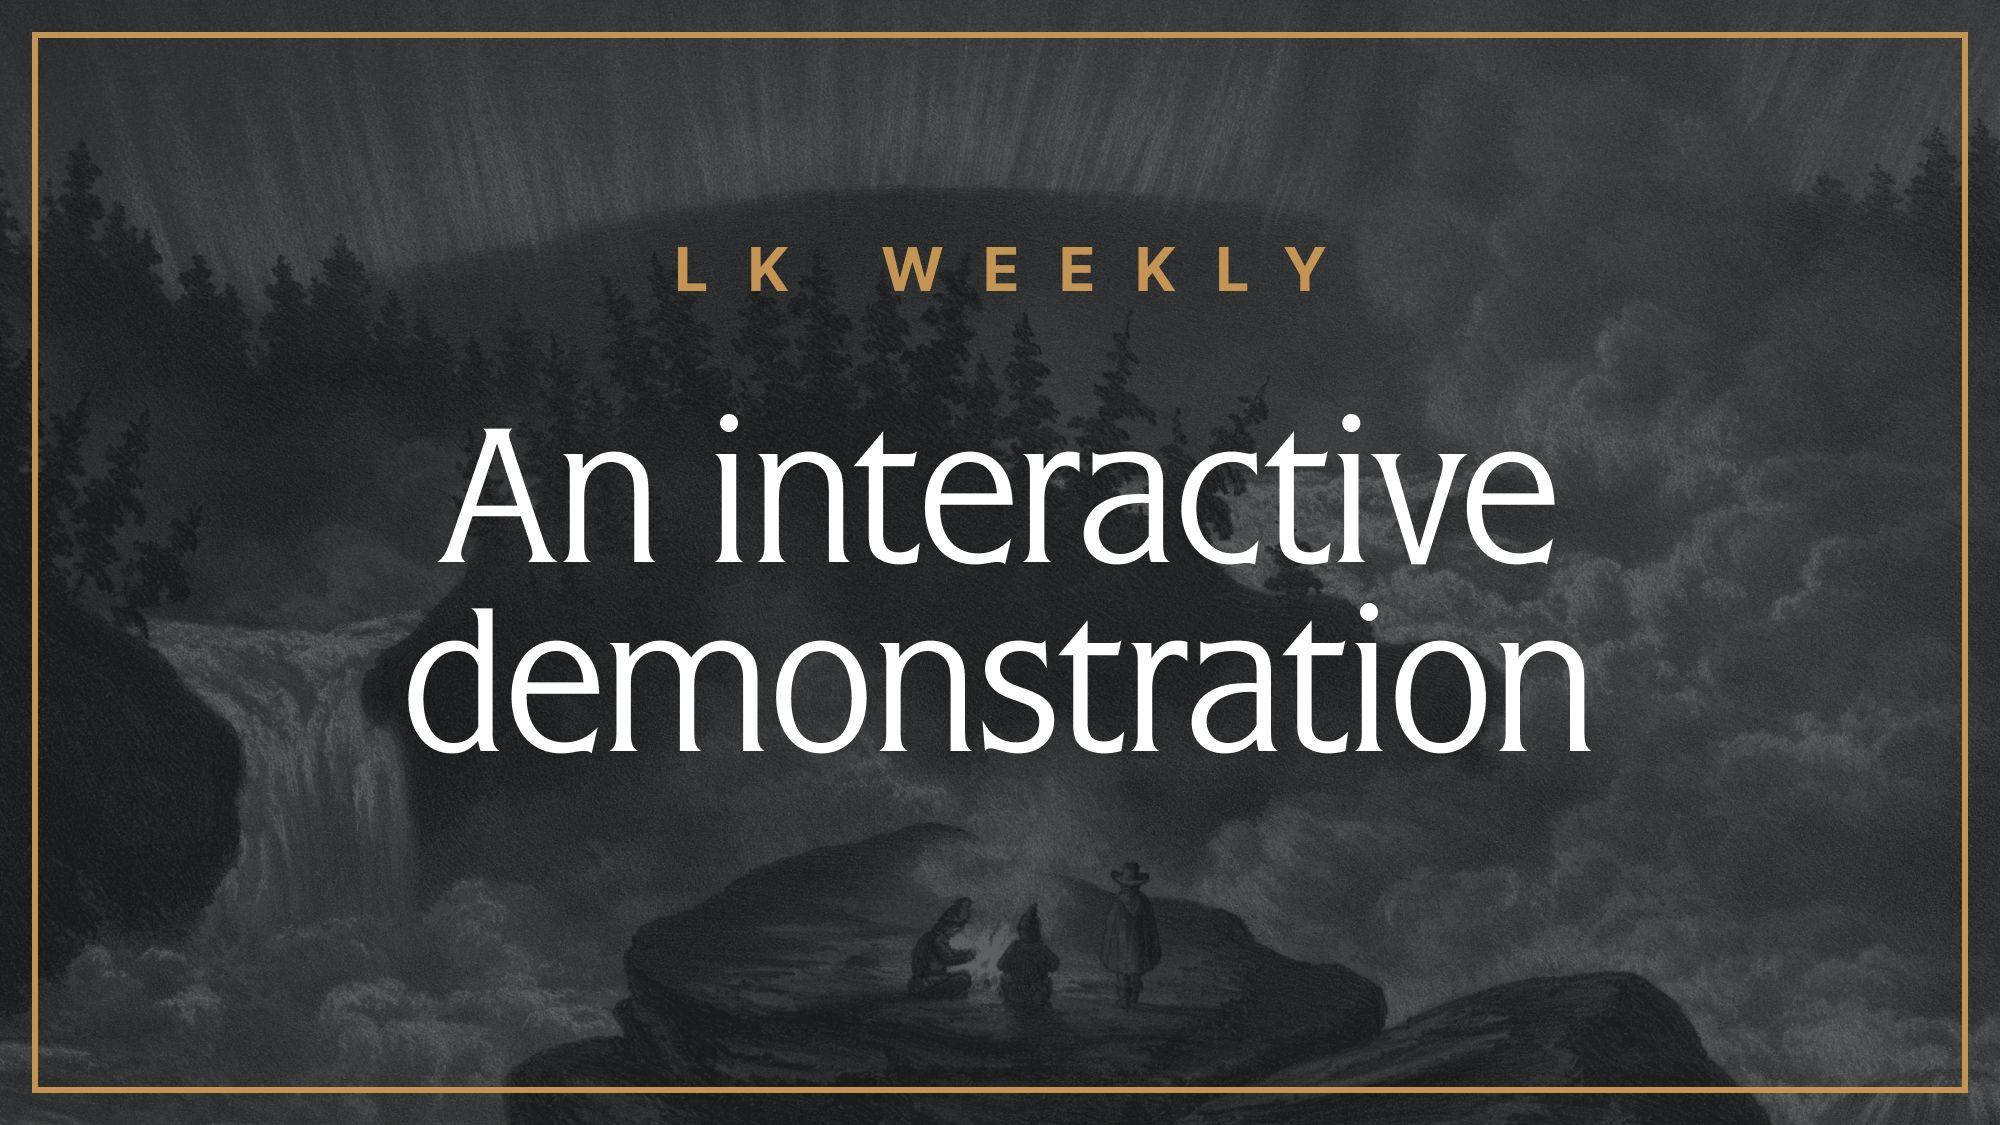 LK Weekly: An interactive demonstration!